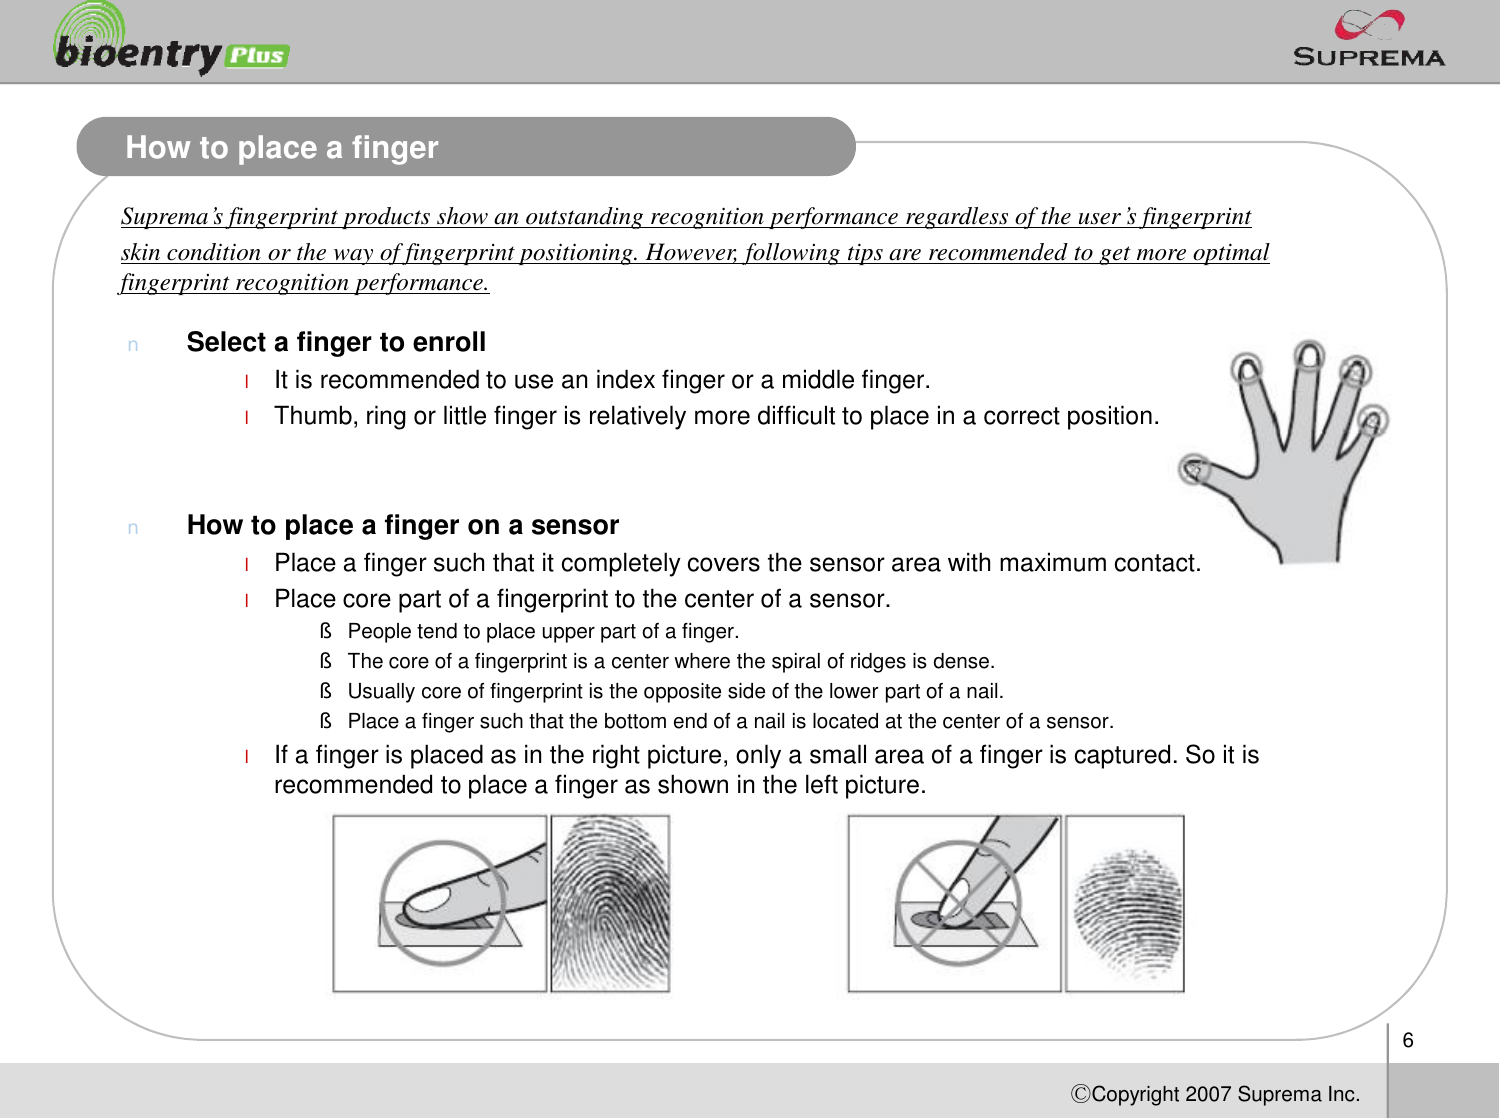 6ⒸCopyright 2007Suprema Inc.How to place a fingerSuprema’s fingerprint products show an outstanding recognition performance regardless of the user’s fingerprint skin condition or the way of fingerprint positioning. However, following tips are recommended to get more optimal fingerprint recognition performance.nSelect a finger to enrolllIt is recommended to use an index finger or a middle finger. lThumb, ring or little finger is relatively more difficult to place in a correct position.nHow to place a finger on a sensorlPlace a finger such that it completely covers the sensor area with maximum contact. lPlace core part of a fingerprint to the center of a sensor.§People tend to place upper part of a finger.§The core of a fingerprint is a center where the spiral of ridges is dense. §Usually core of fingerprint is the opposite side of the lower part of a nail. §Place a finger such that the bottom end of a nail is located at the center of a sensor.lIf a finger is placed as in the right picture, only a small area of a finger is captured. So it is recommended to place a finger as shown in the left picture. 